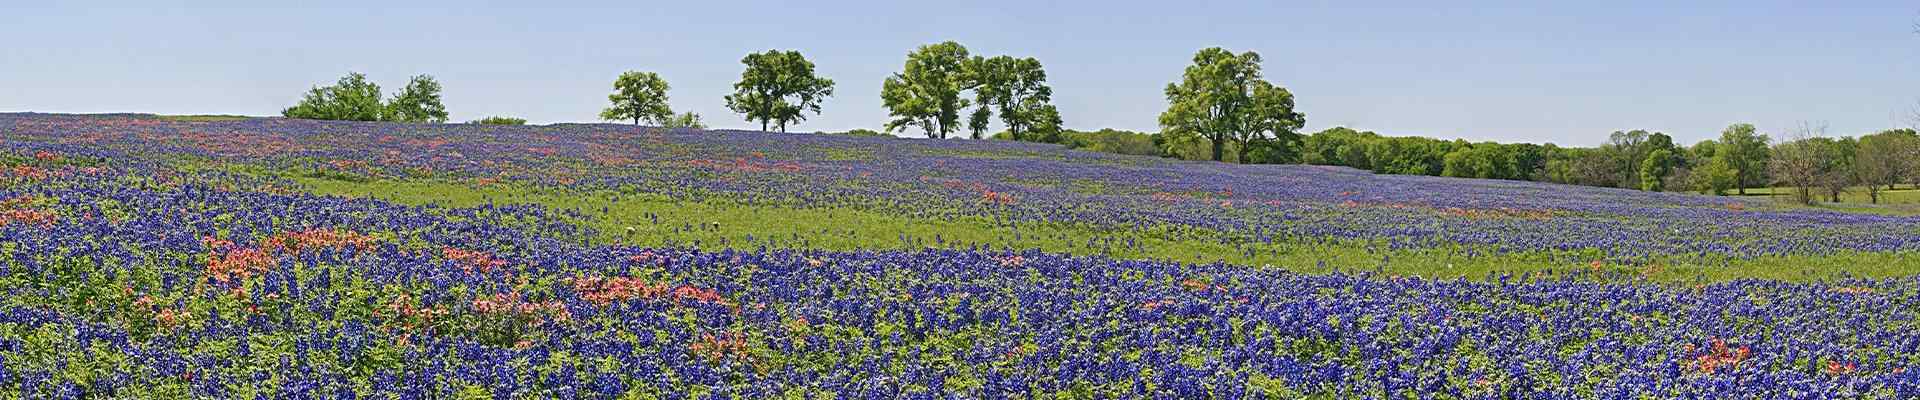 a field of blue bell flowers in copper canyon texas